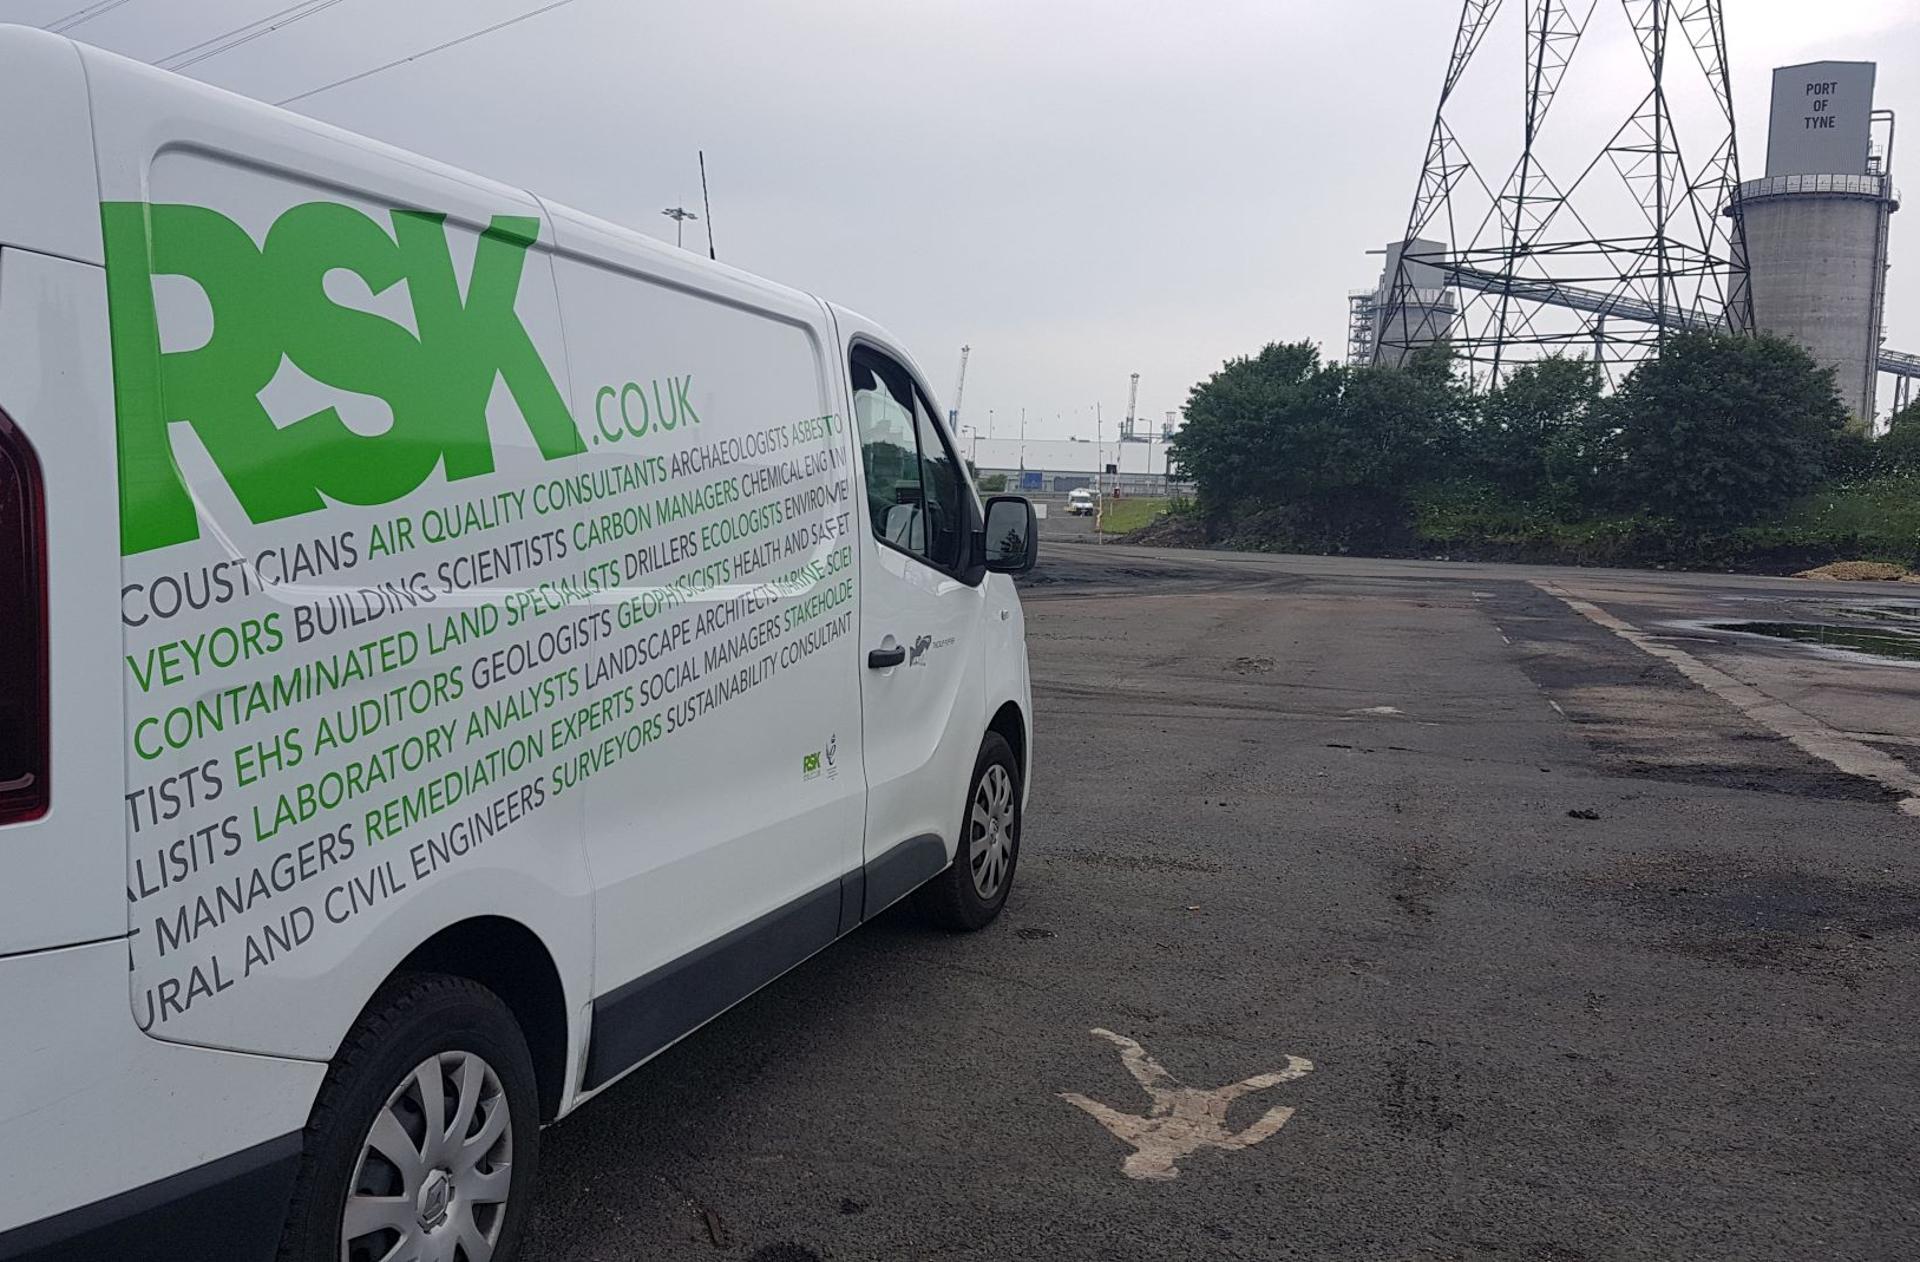 Acquisitive environmental services group RSK passes £1bn in revenue